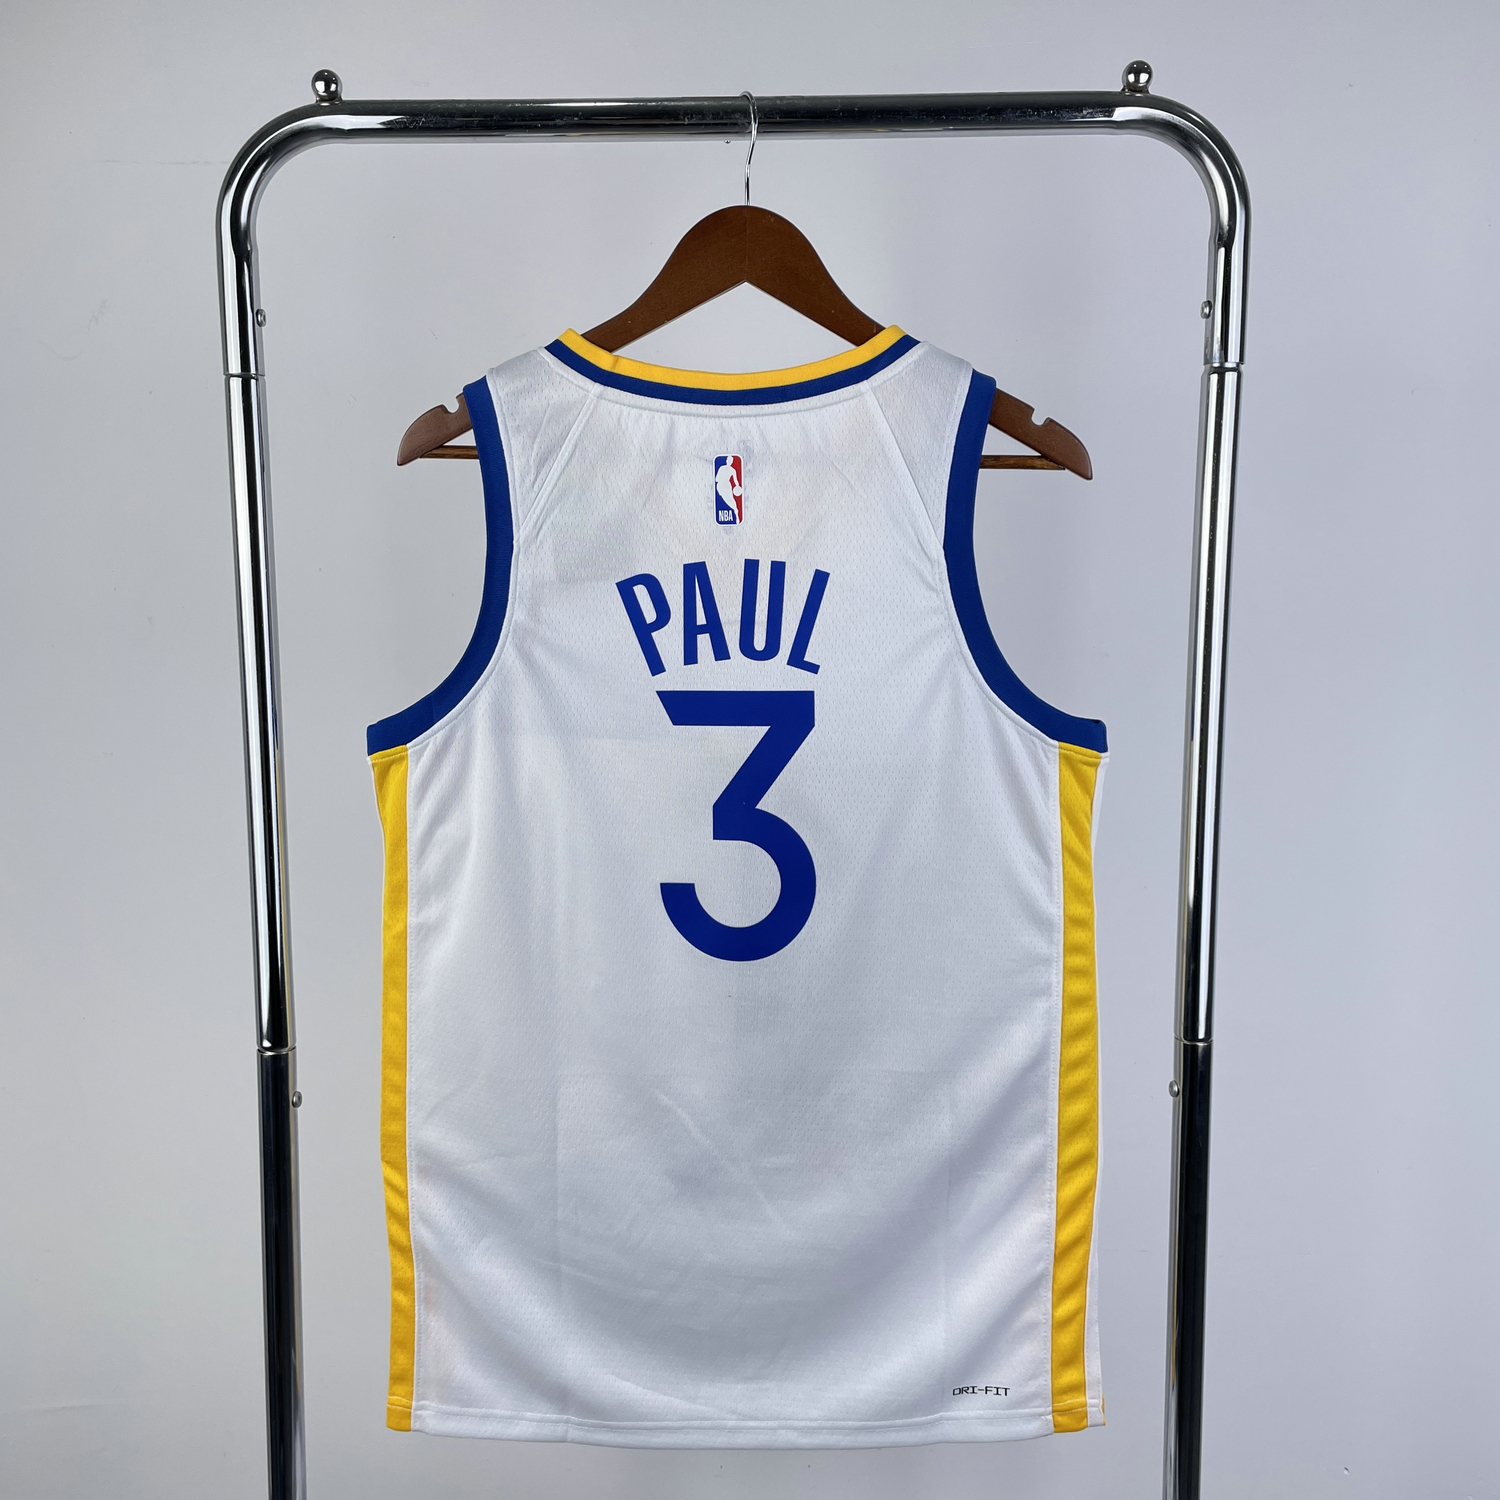 Chris Paul with his new Golden State Warriors jersey 🔥